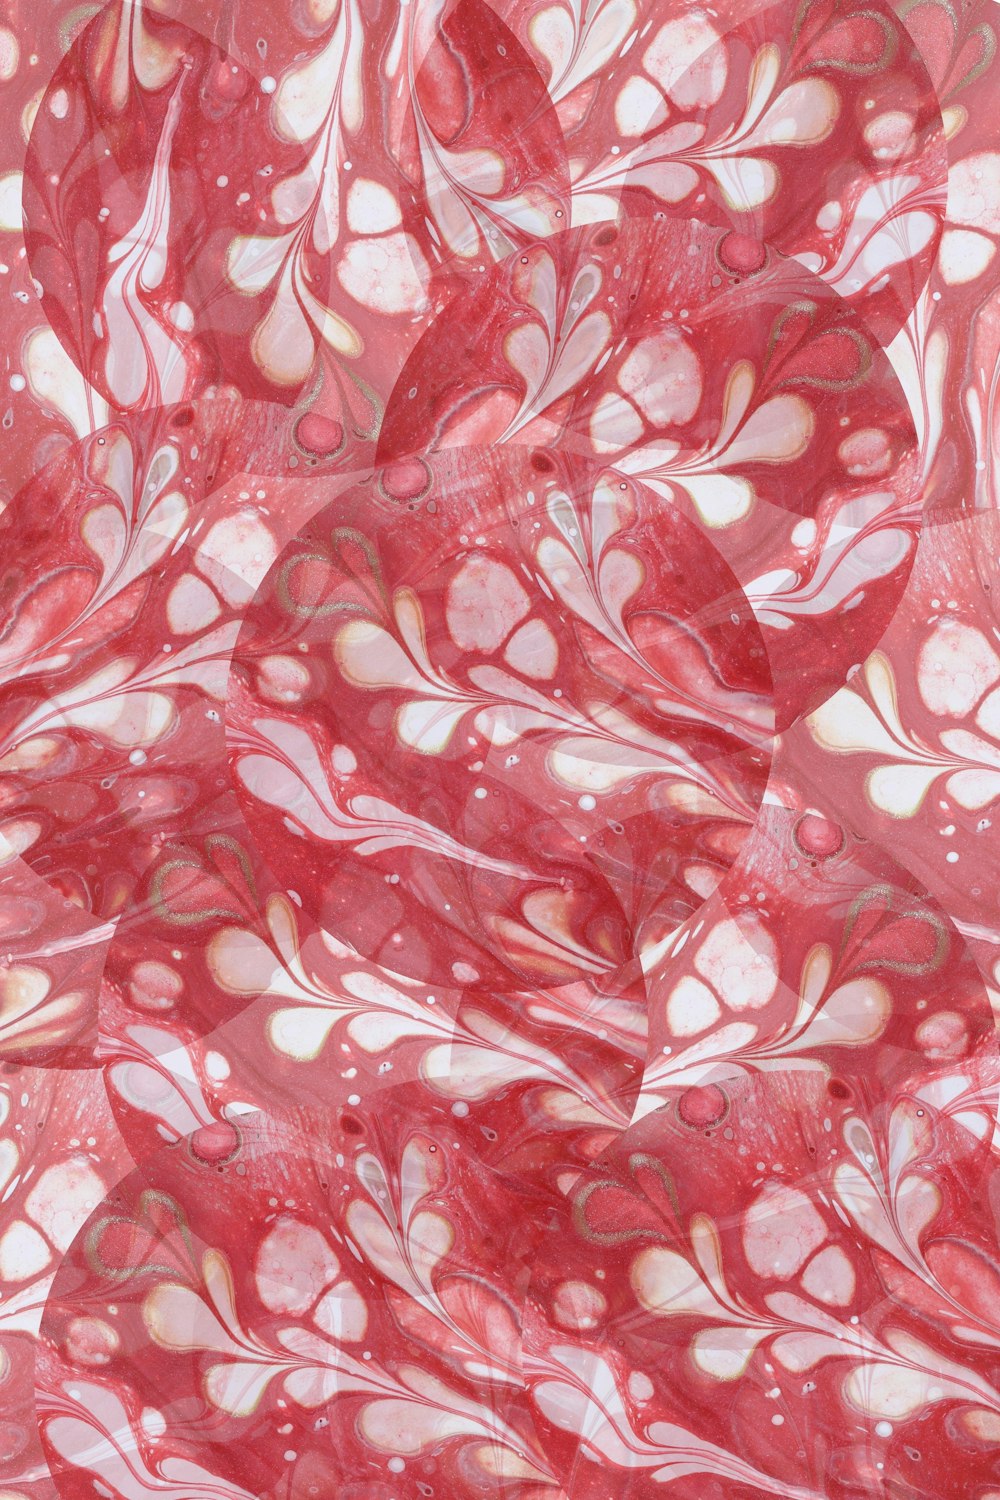 a red and white background with lots of bubbles